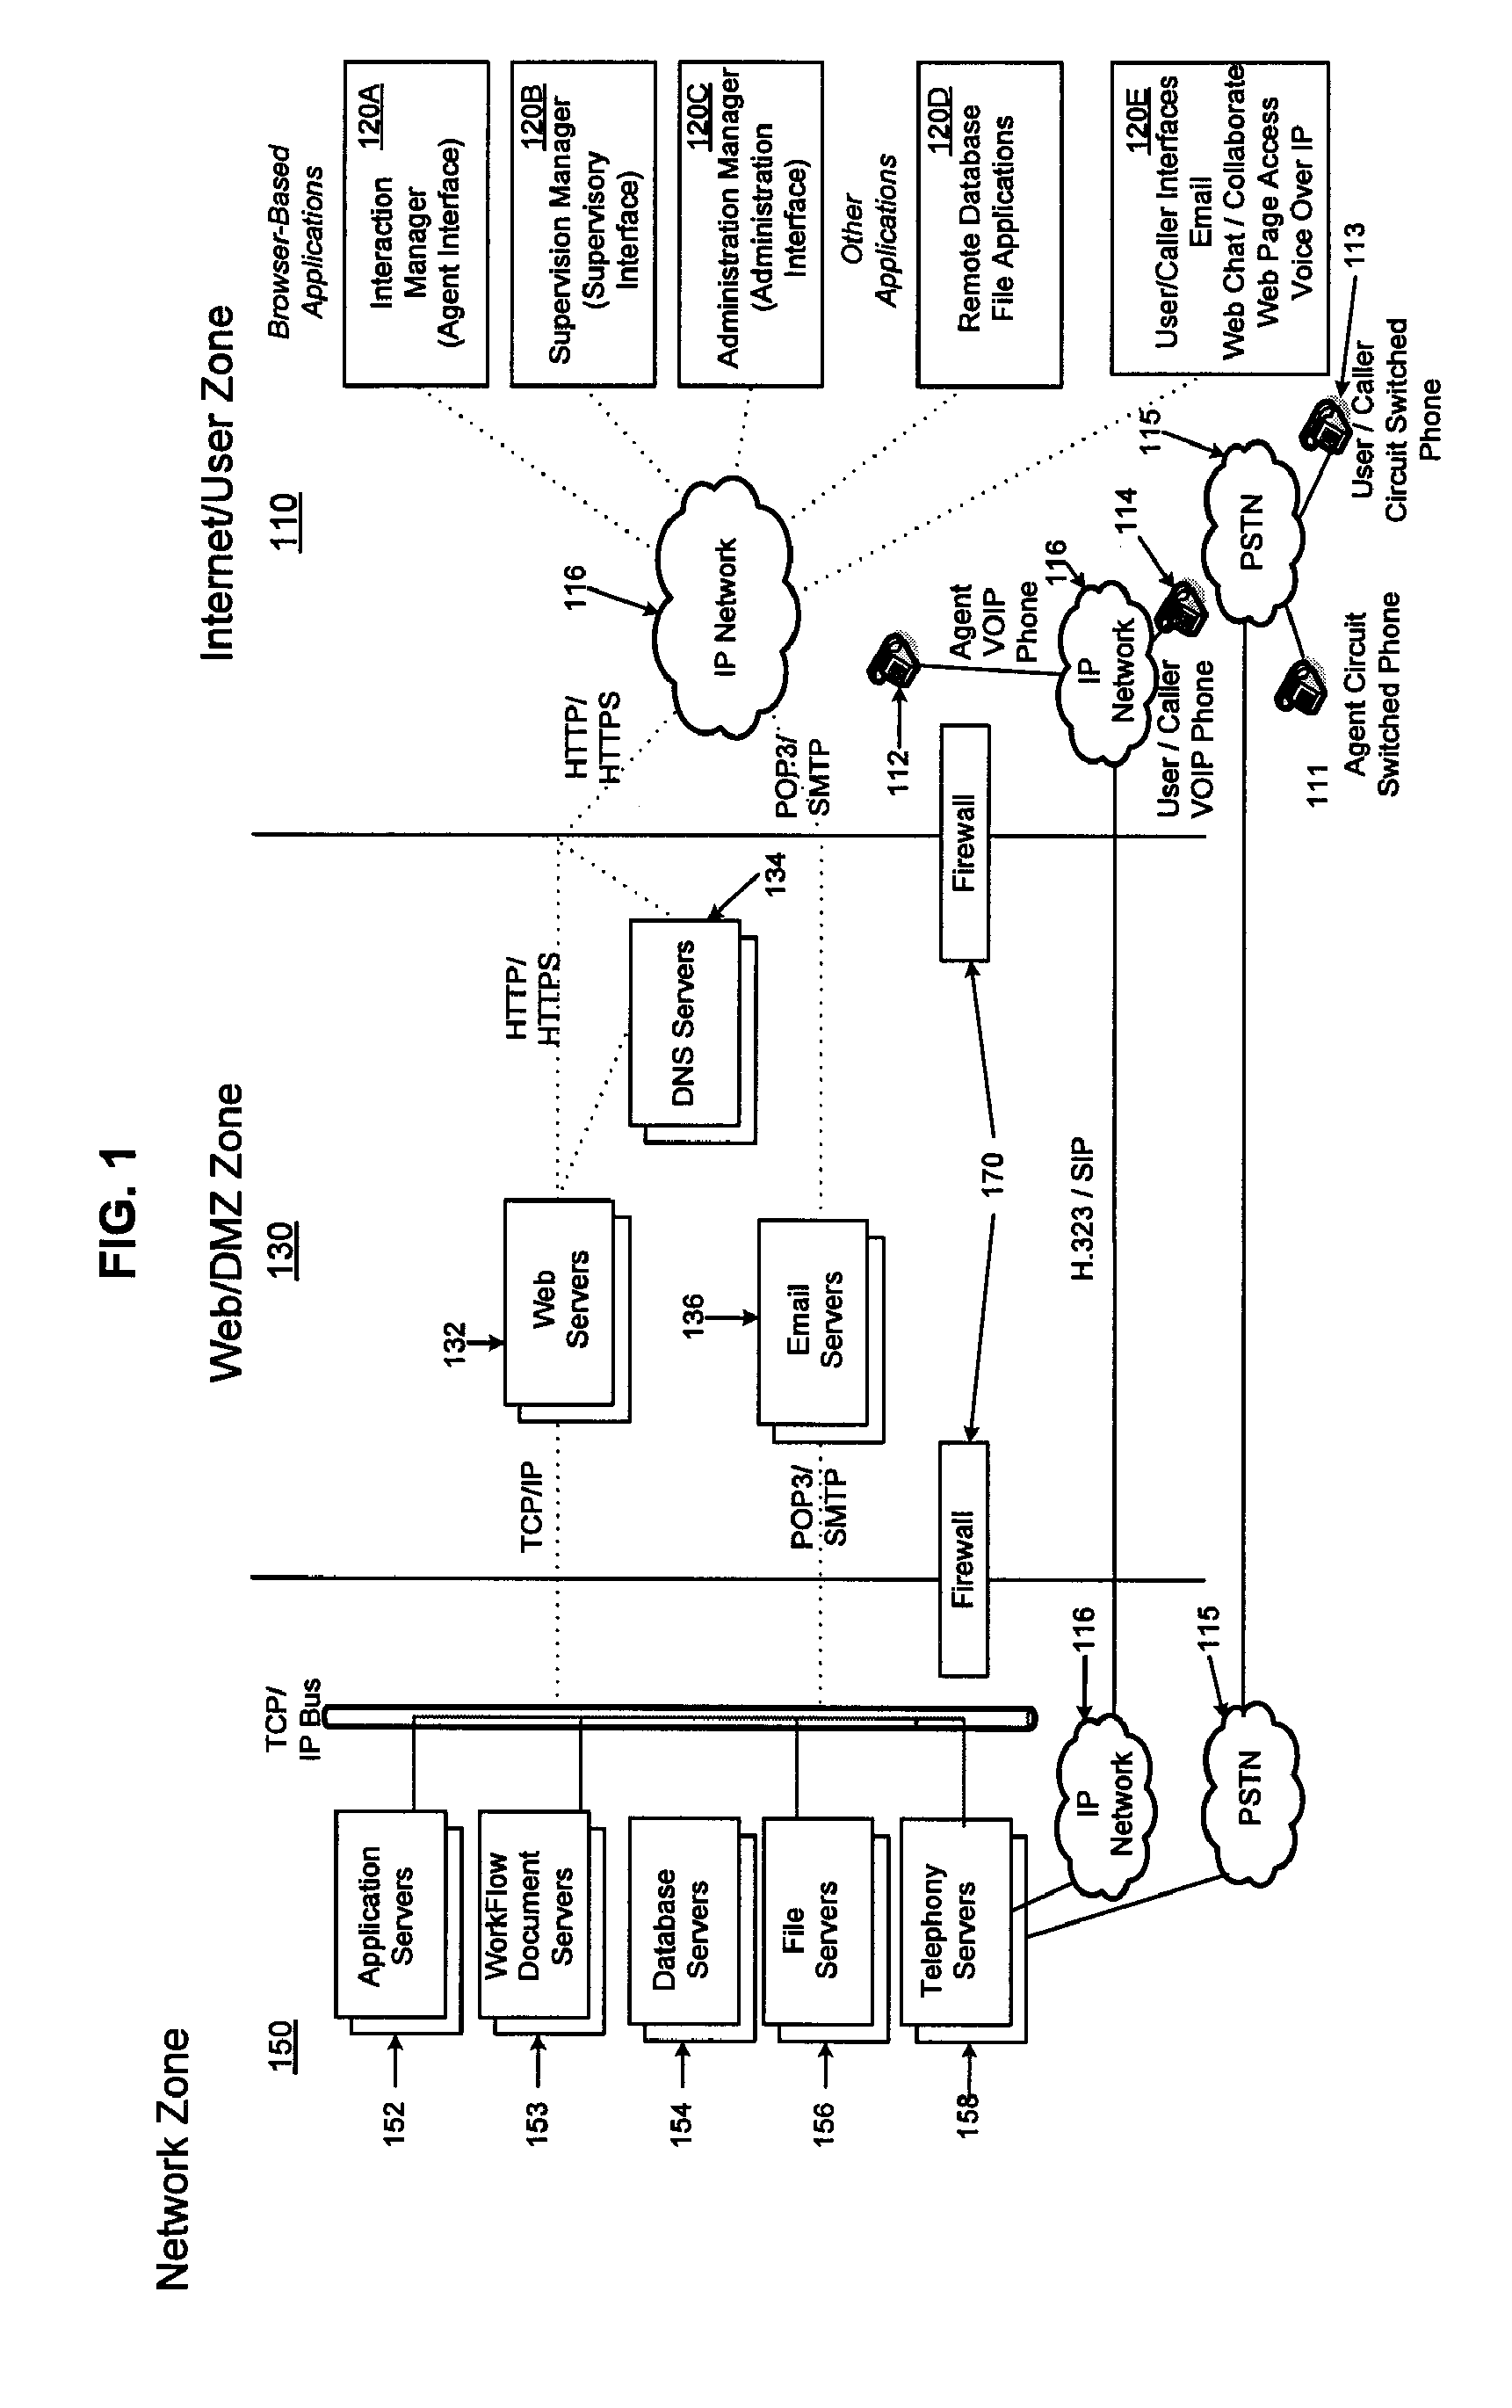 System and method for routing workflow items based on workflow templates in a call center